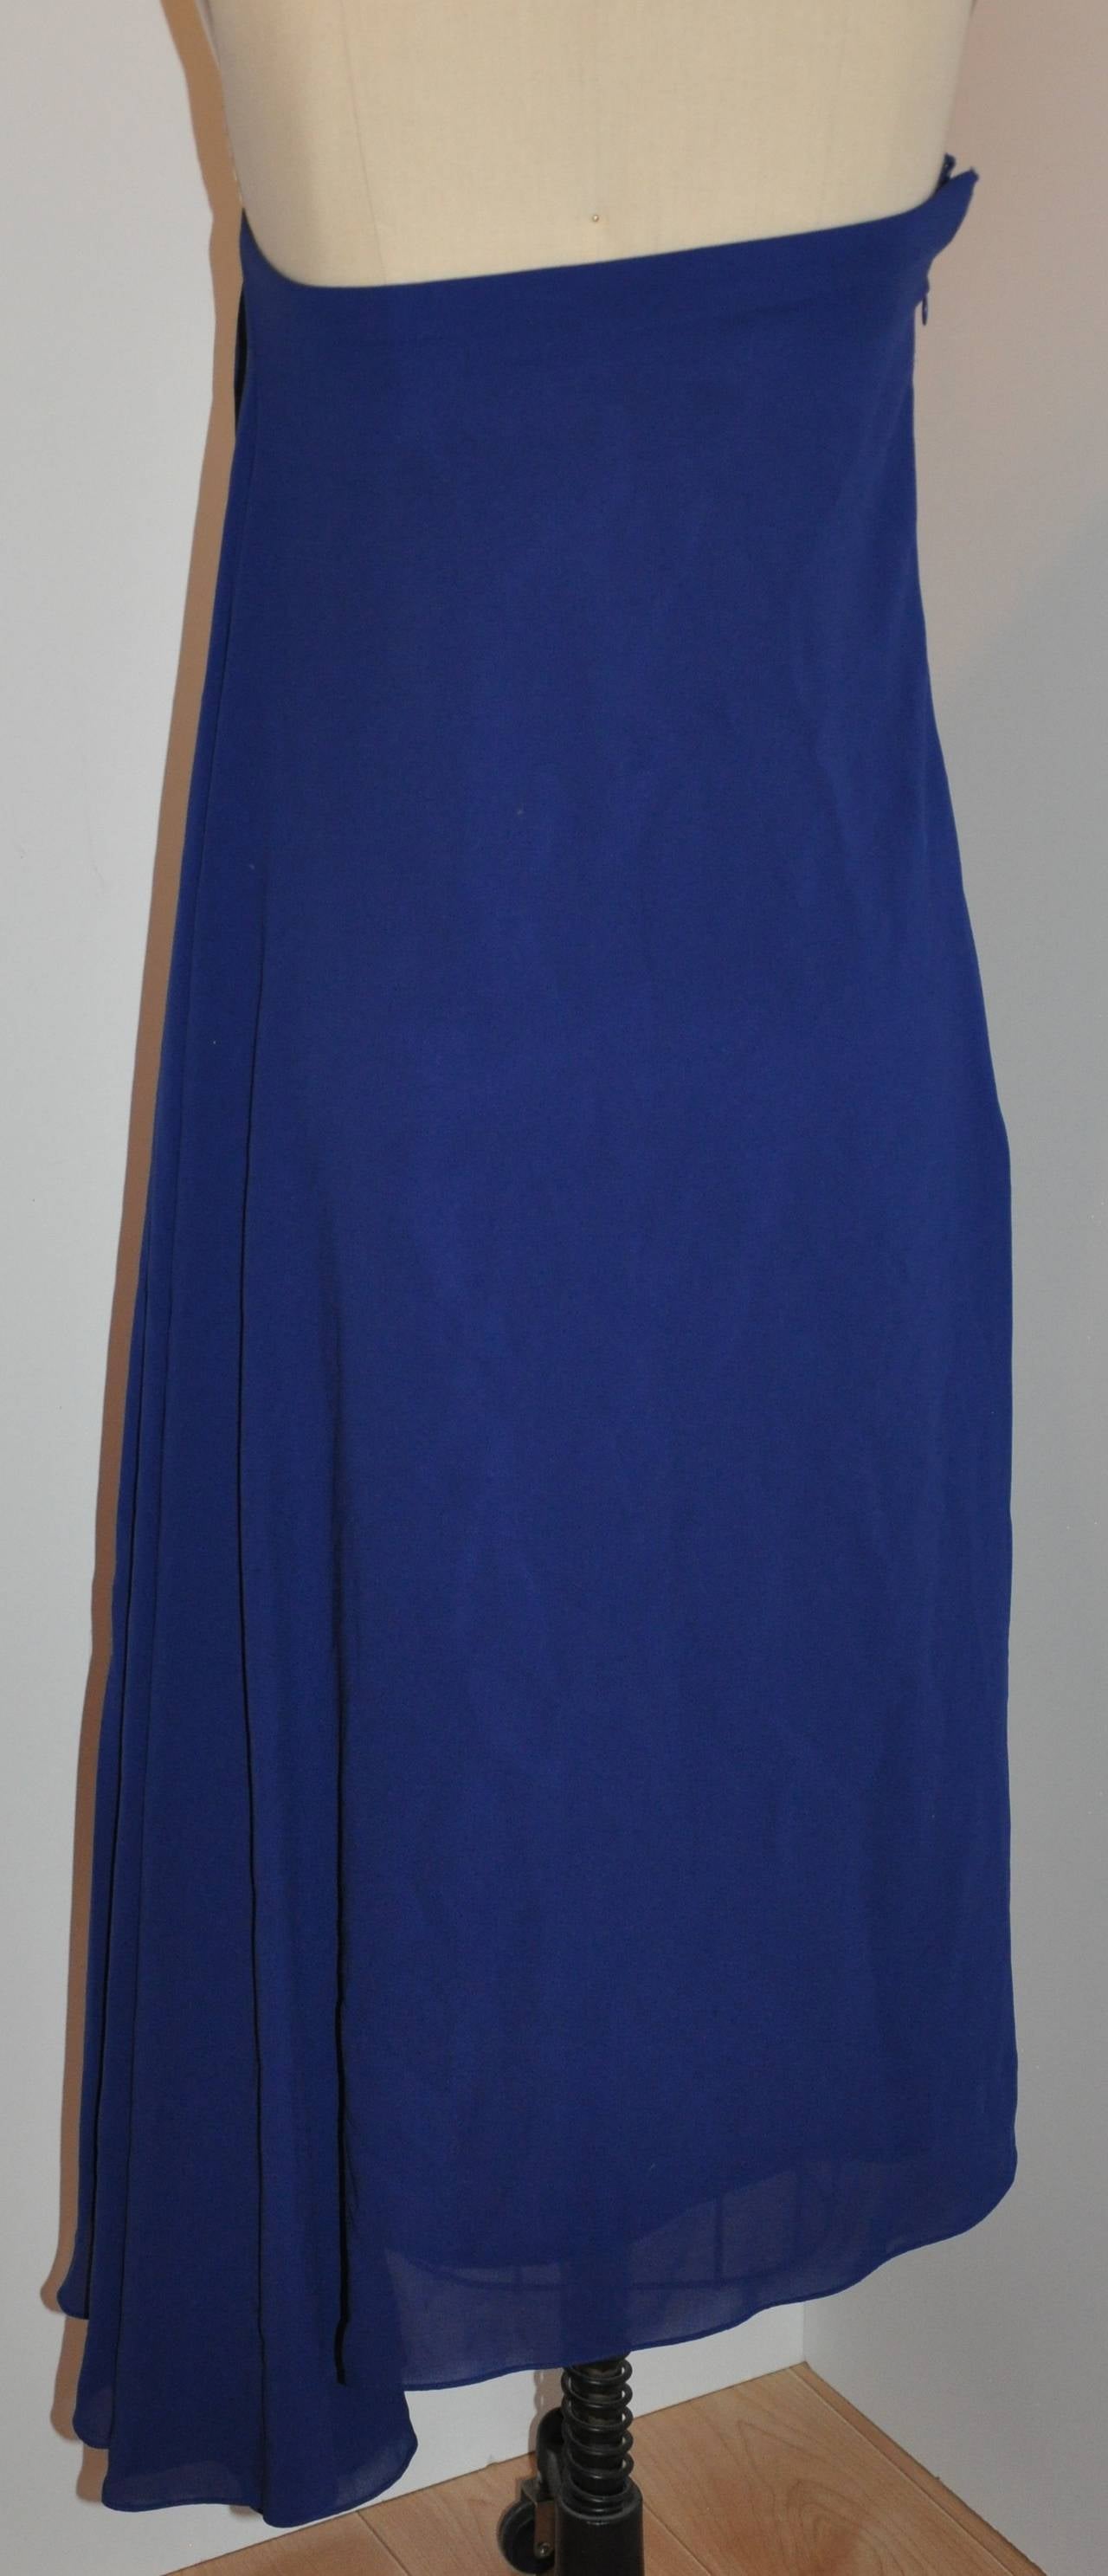 Jil Sander Bold Blue Fully Lined Silk Crepe Strapless Cocktail Dress In Excellent Condition For Sale In New York, NY